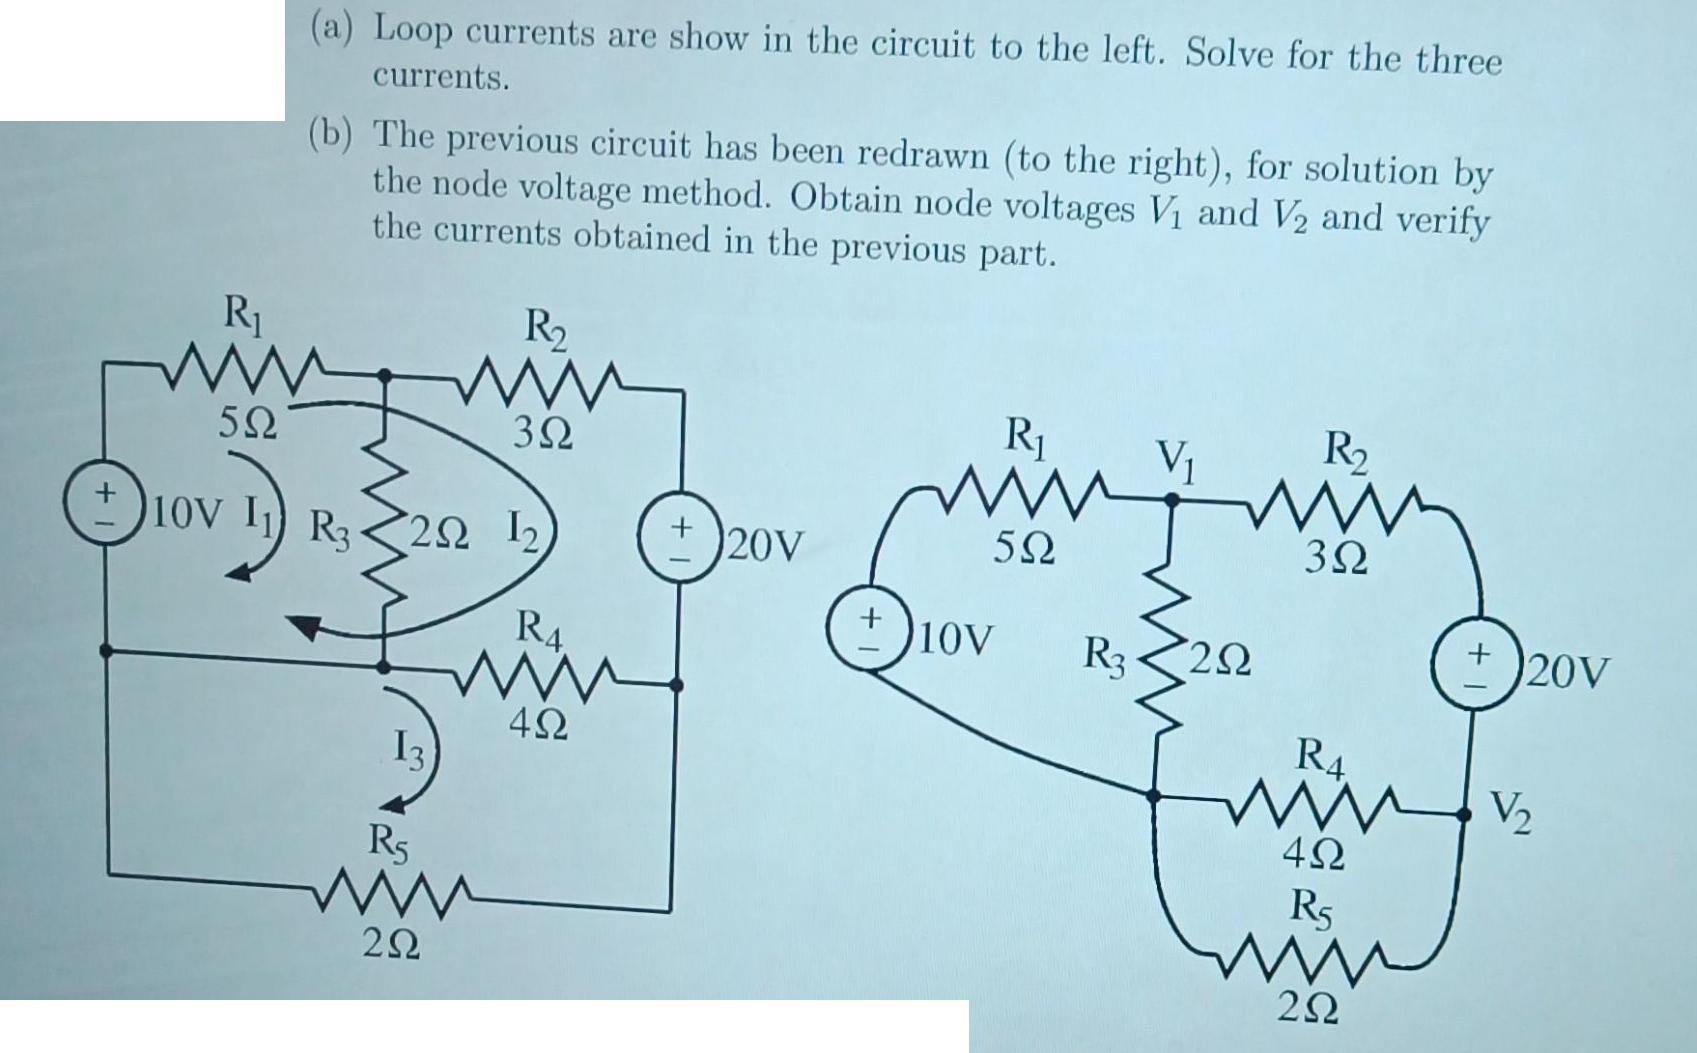 R 592  (a) Loop currents are show in the circuit to the left. Solve for the three currents. (b) The previous